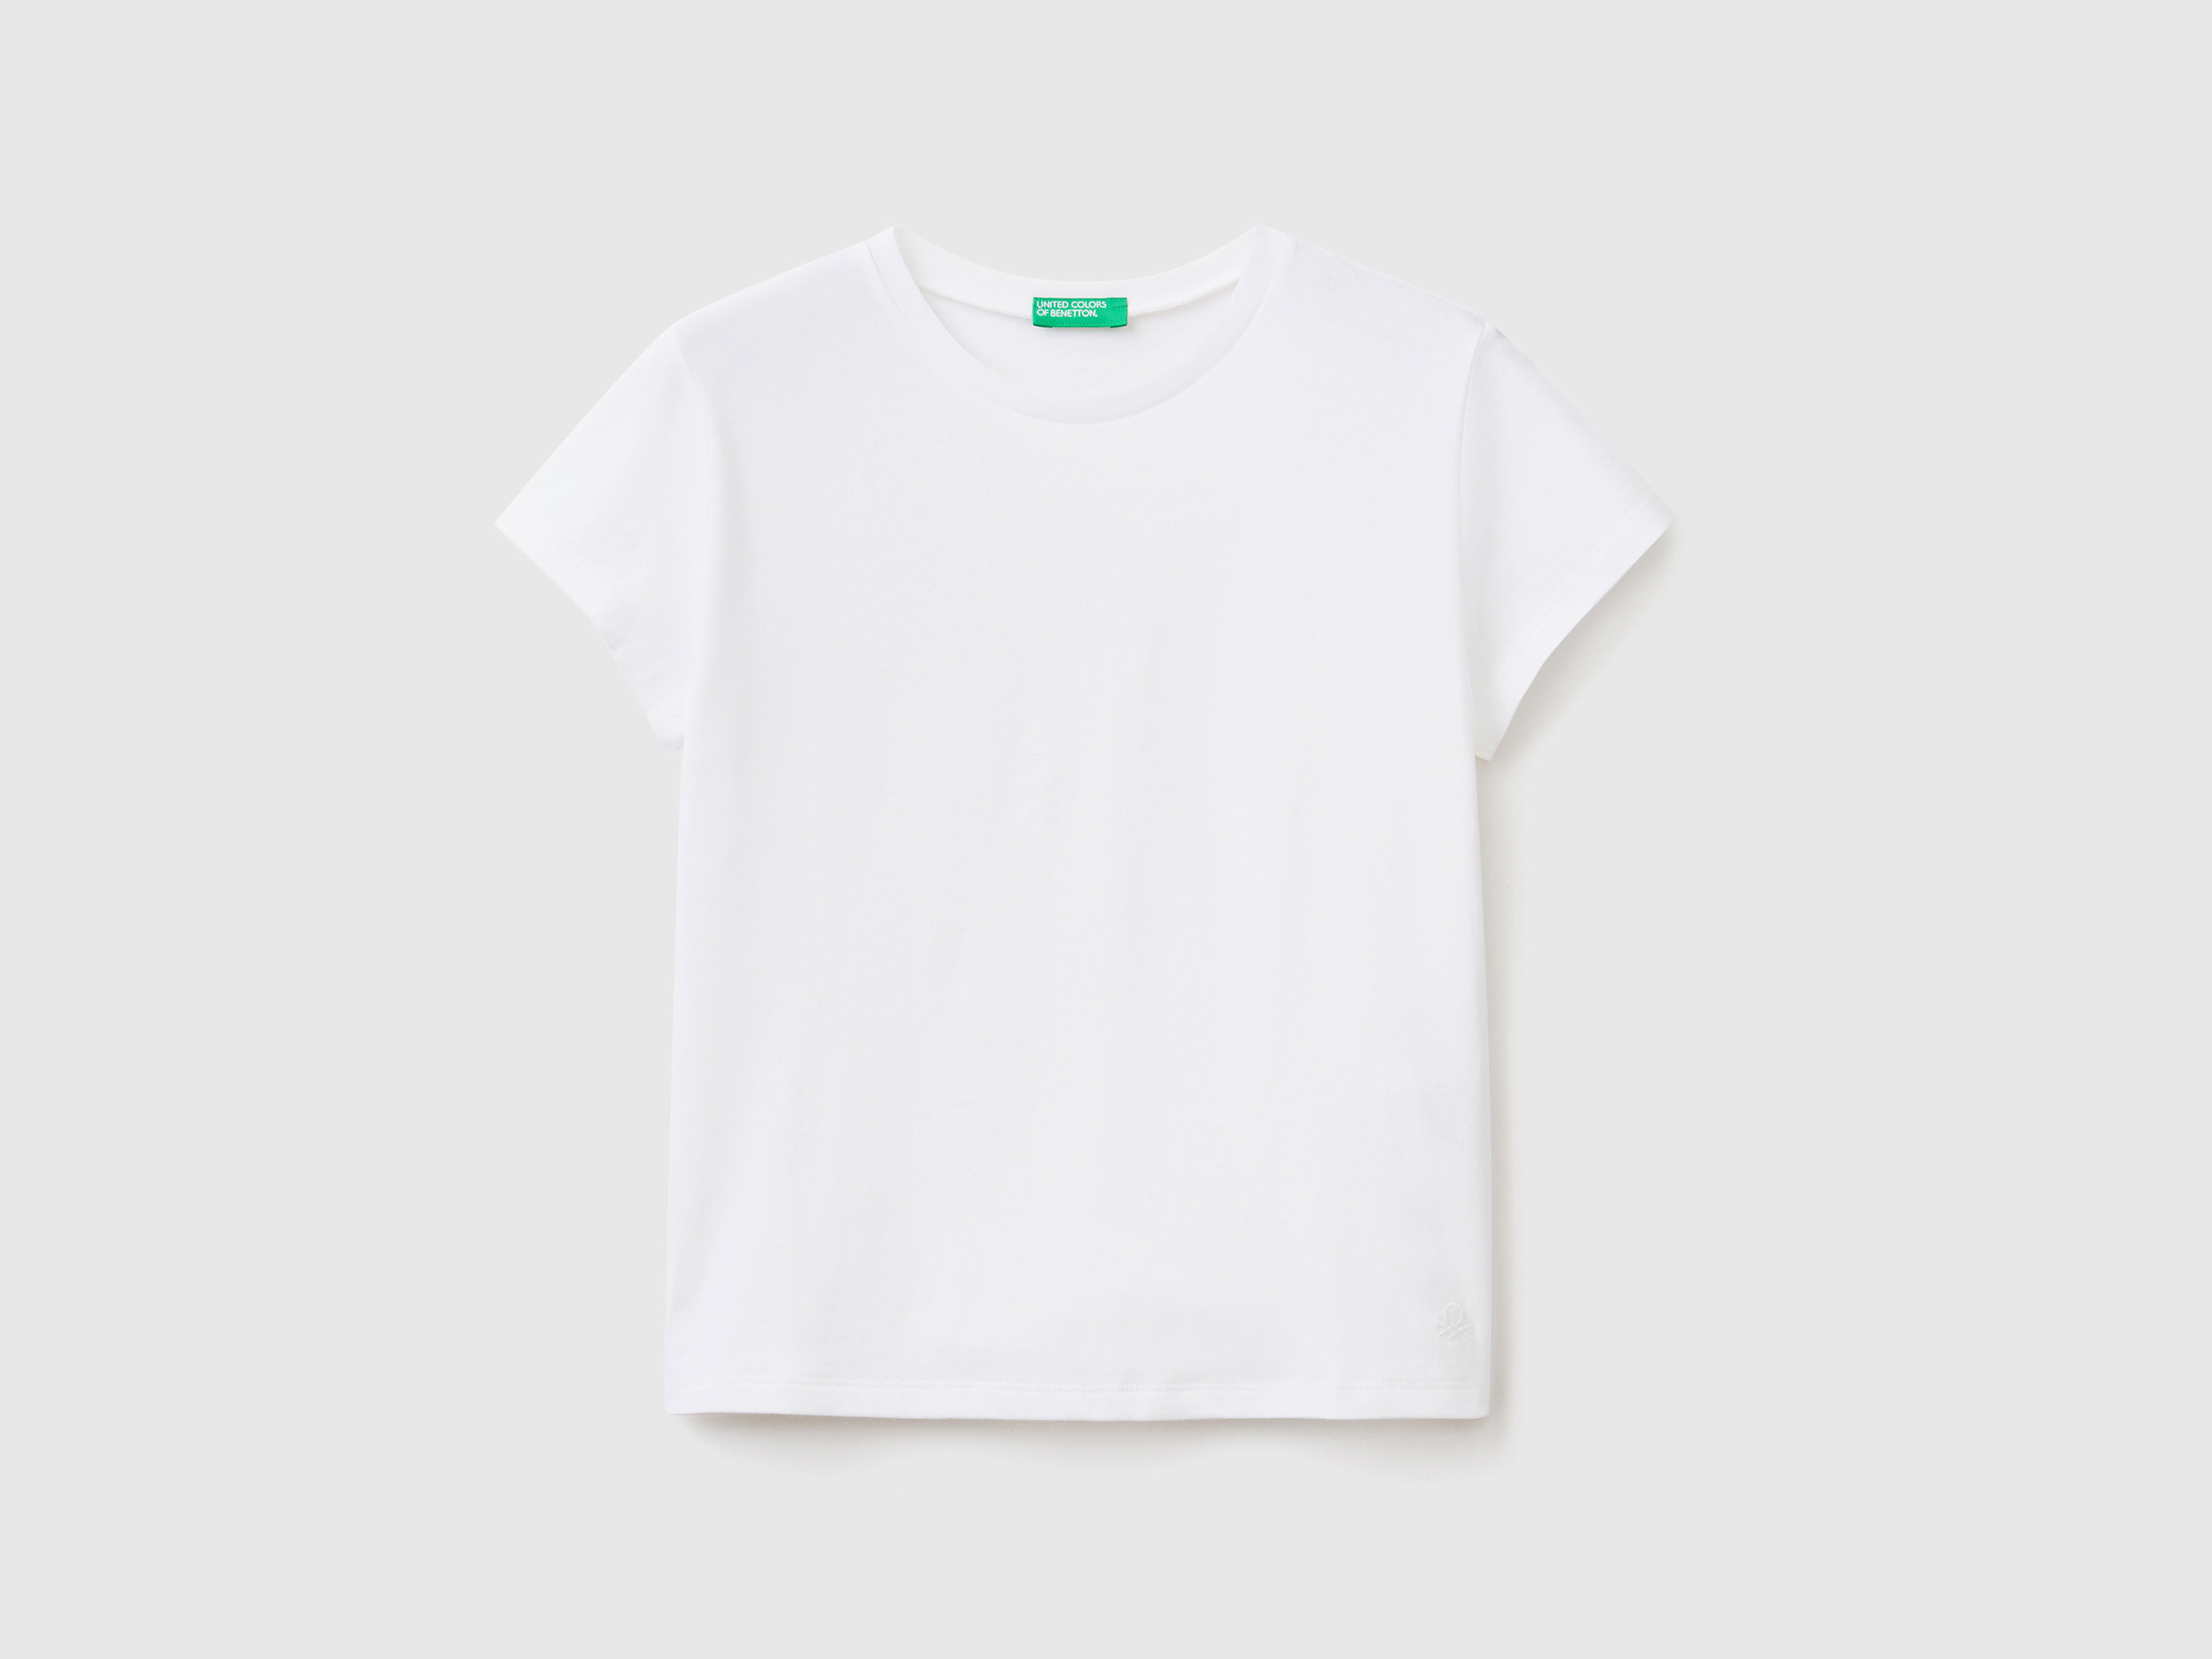 Image of Benetton, T-shirt In Pure Organic Cotton, size S, White, Kids